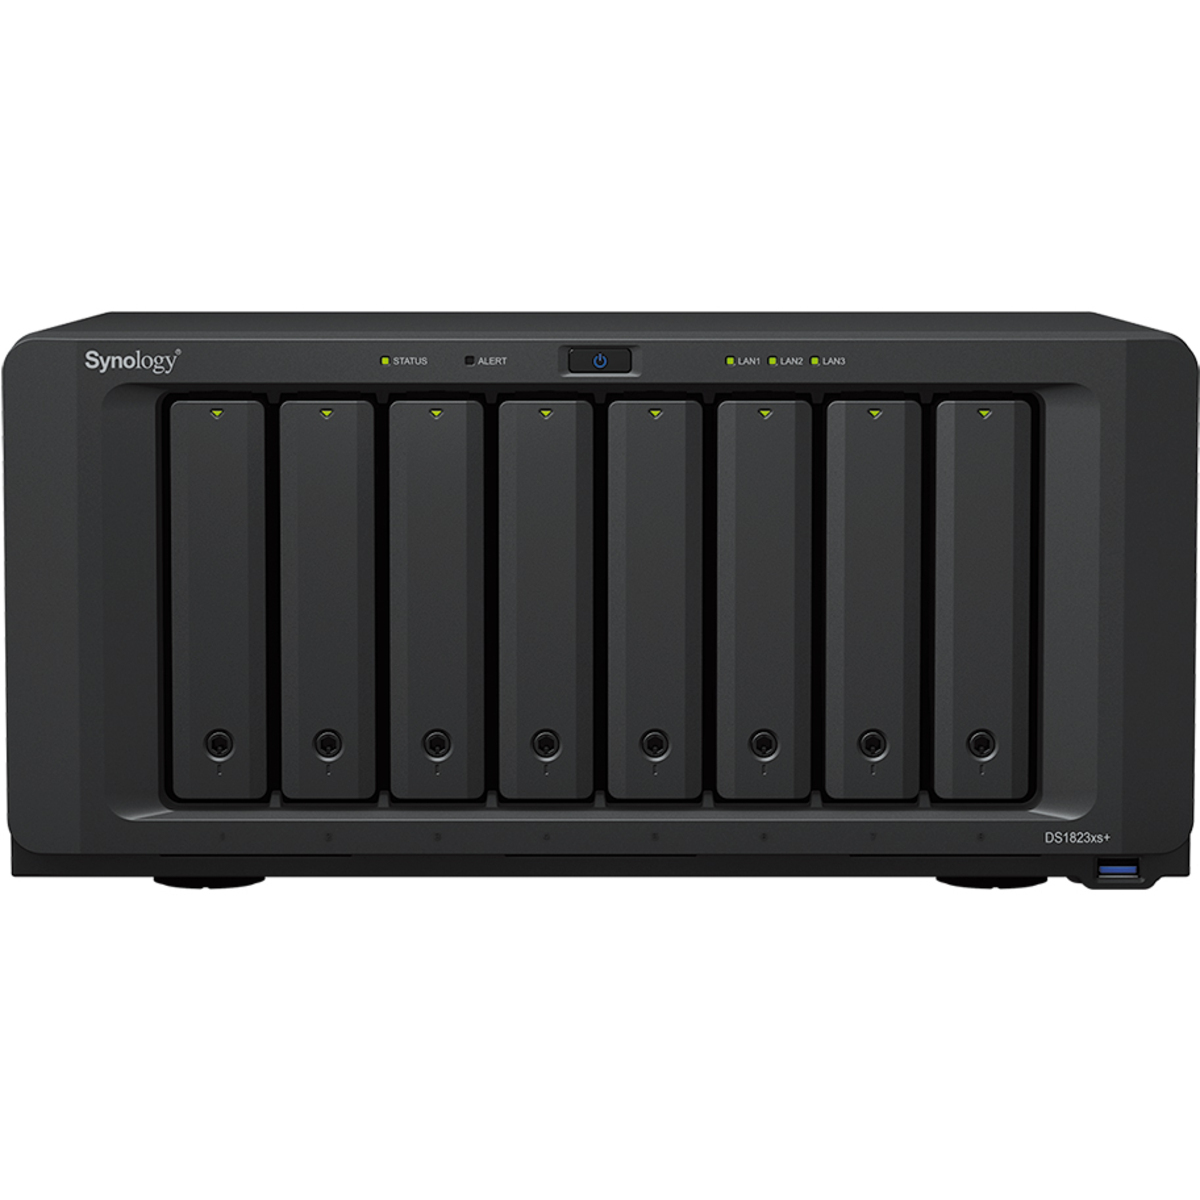 Synology DiskStation DS1823xs+ 168tb 8-Bay Desktop Multimedia / Power User / Business NAS - Network Attached Storage Device 7x24tb Western Digital Gold WD241KRYZ 3.5 7200rpm SATA 6Gb/s HDD ENTERPRISE Class Drives Installed - Burn-In Tested DiskStation DS1823xs+